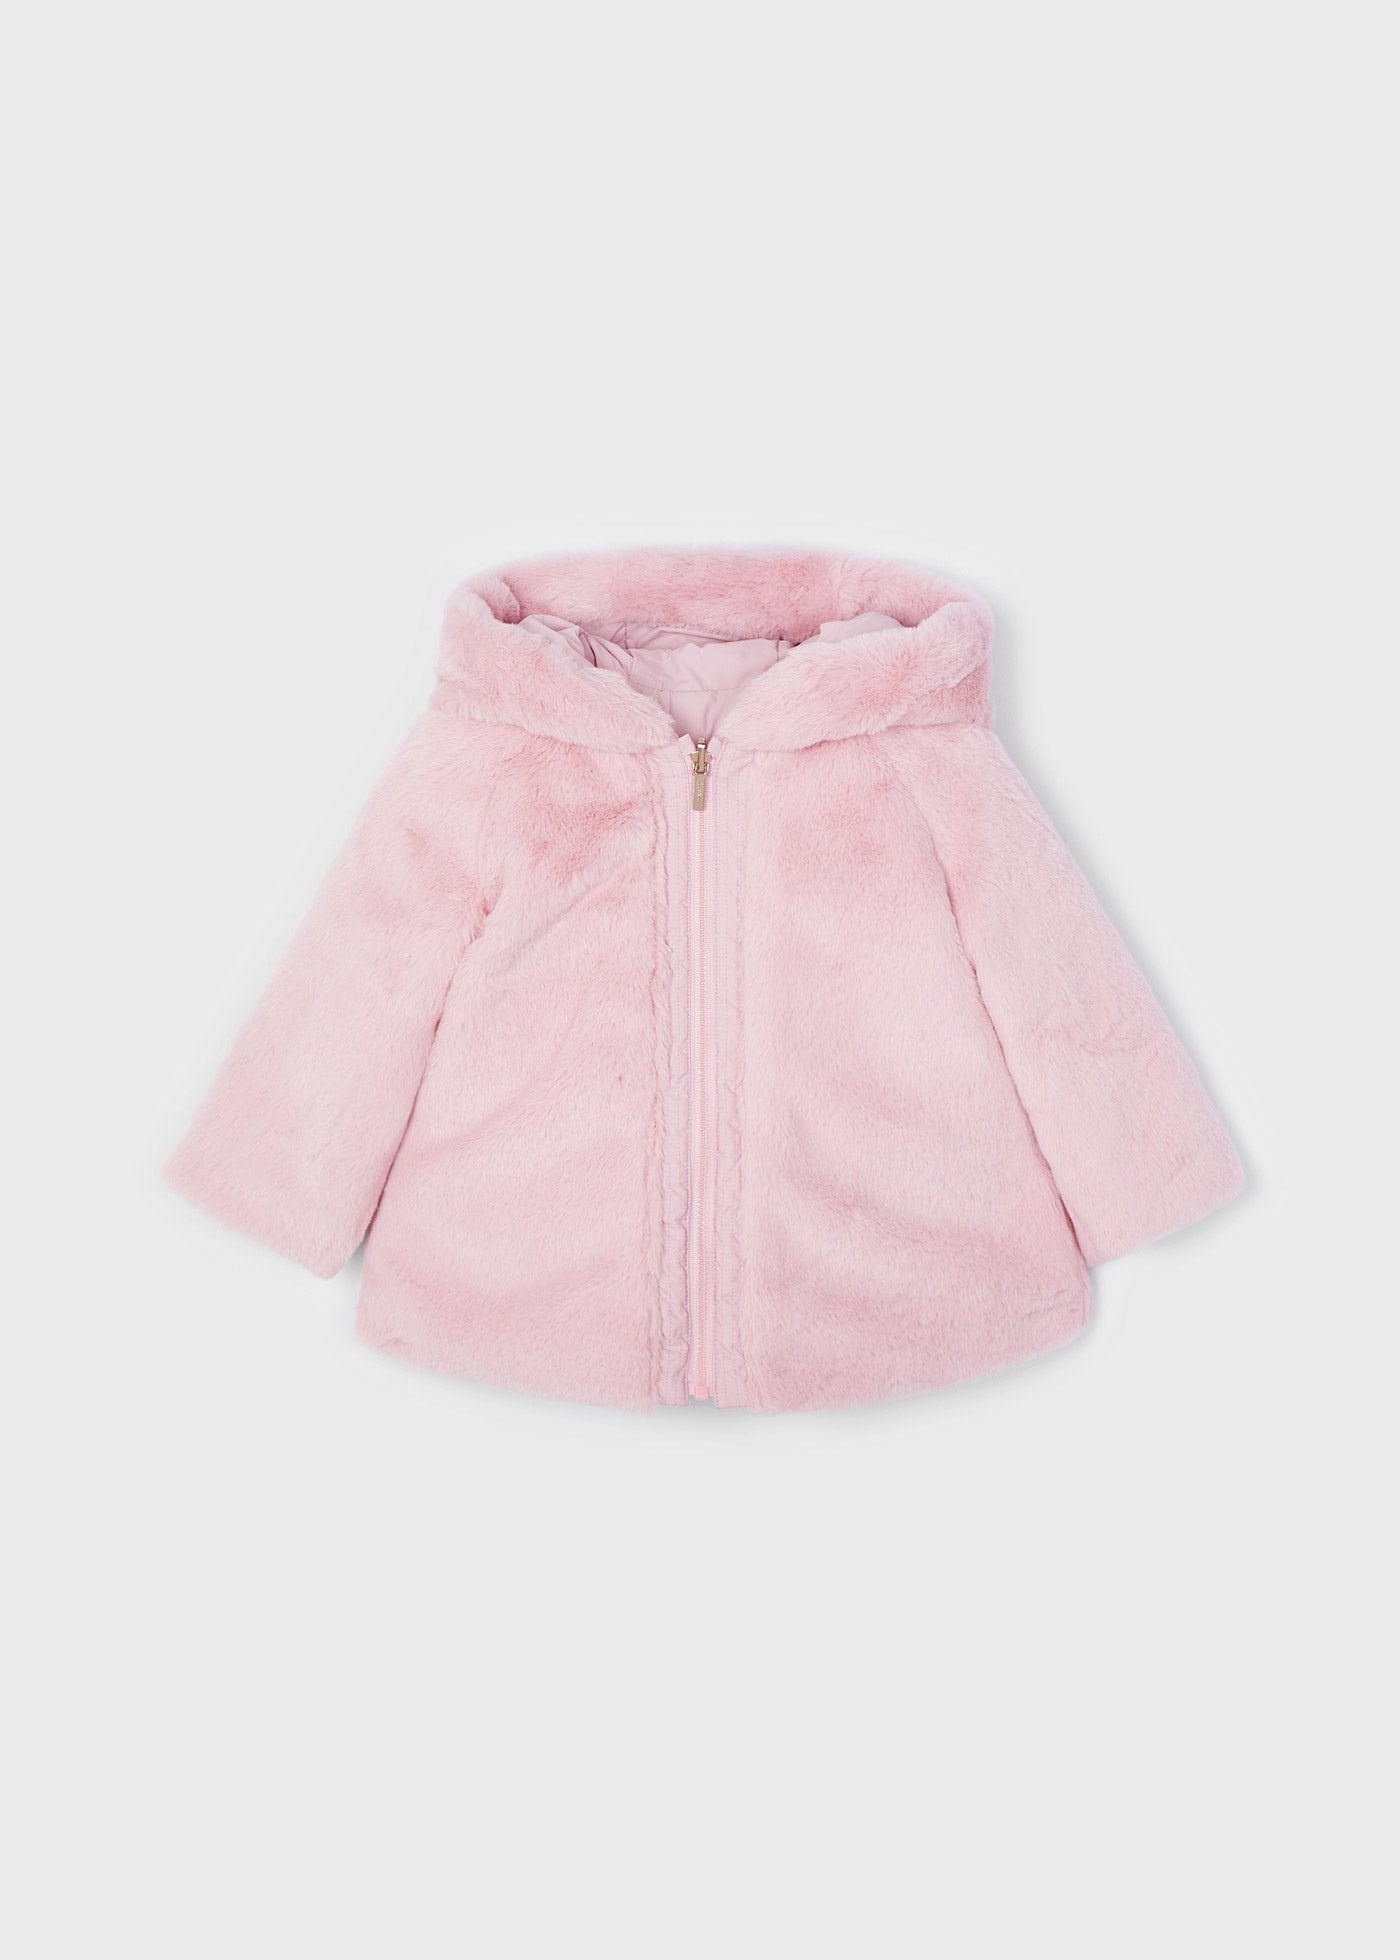 MAY - Mayoral Usa Inc Mayoral Usa Inc Reversible Faux Fur Jacket - Little Miss Muffin Children & Home